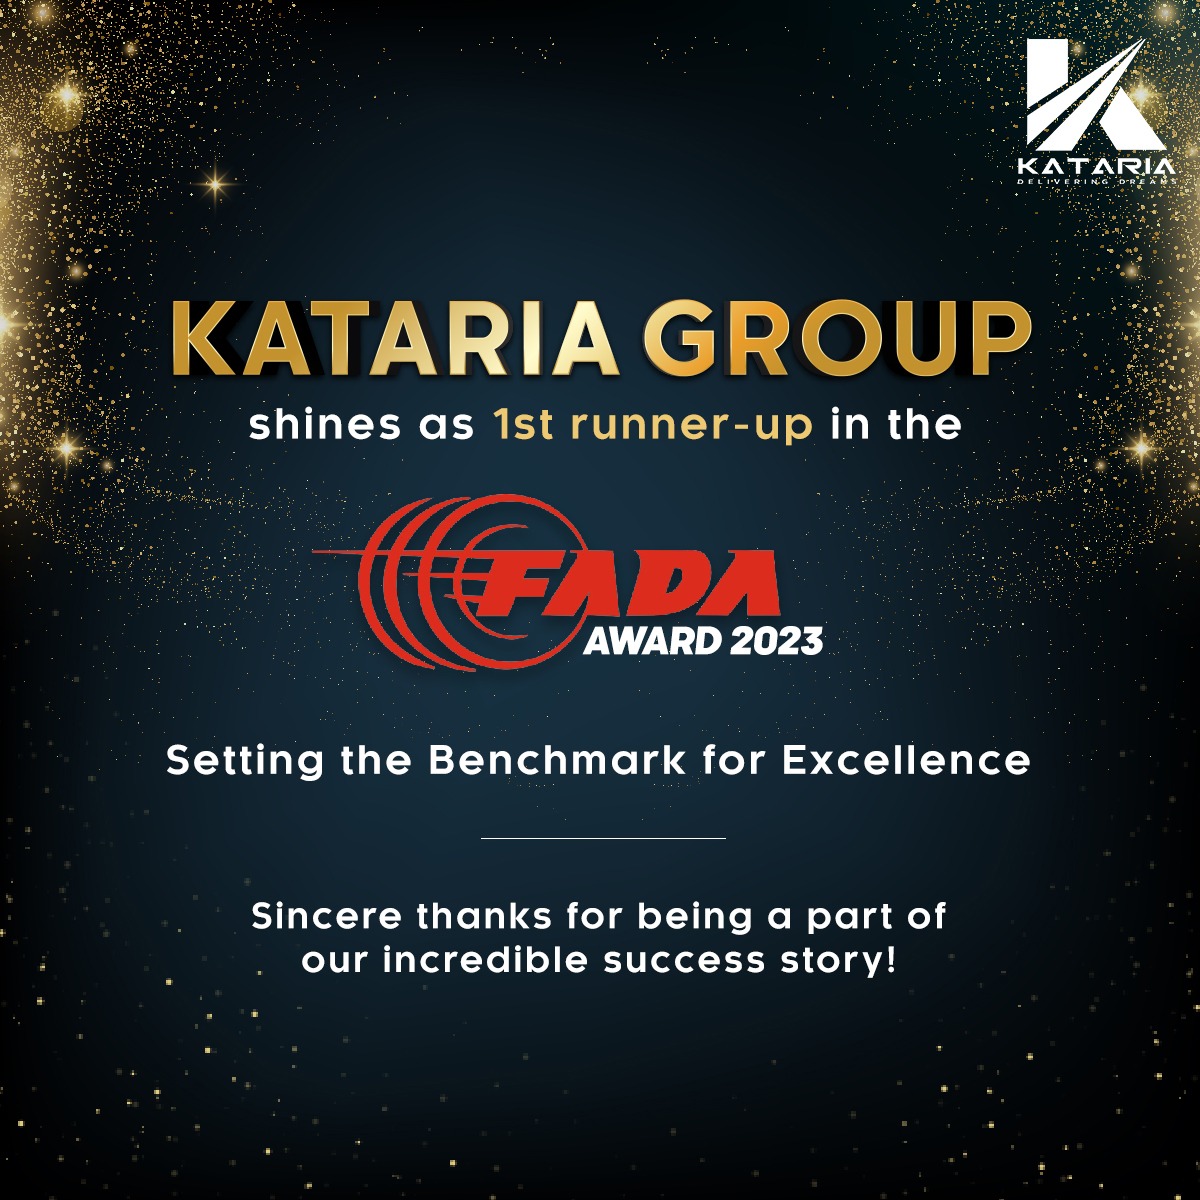 Kataria Group Shines Bigger and Brighter as 1st Runner-Up in the FADA Awards 2023! Setting the Benchmark for Unstoppable Excellence Gratitude to all who contributed to our phenomenal success story!

#KatariaGroup #FADAAwards2023 #UnleashingGreatness #congratulationsteam